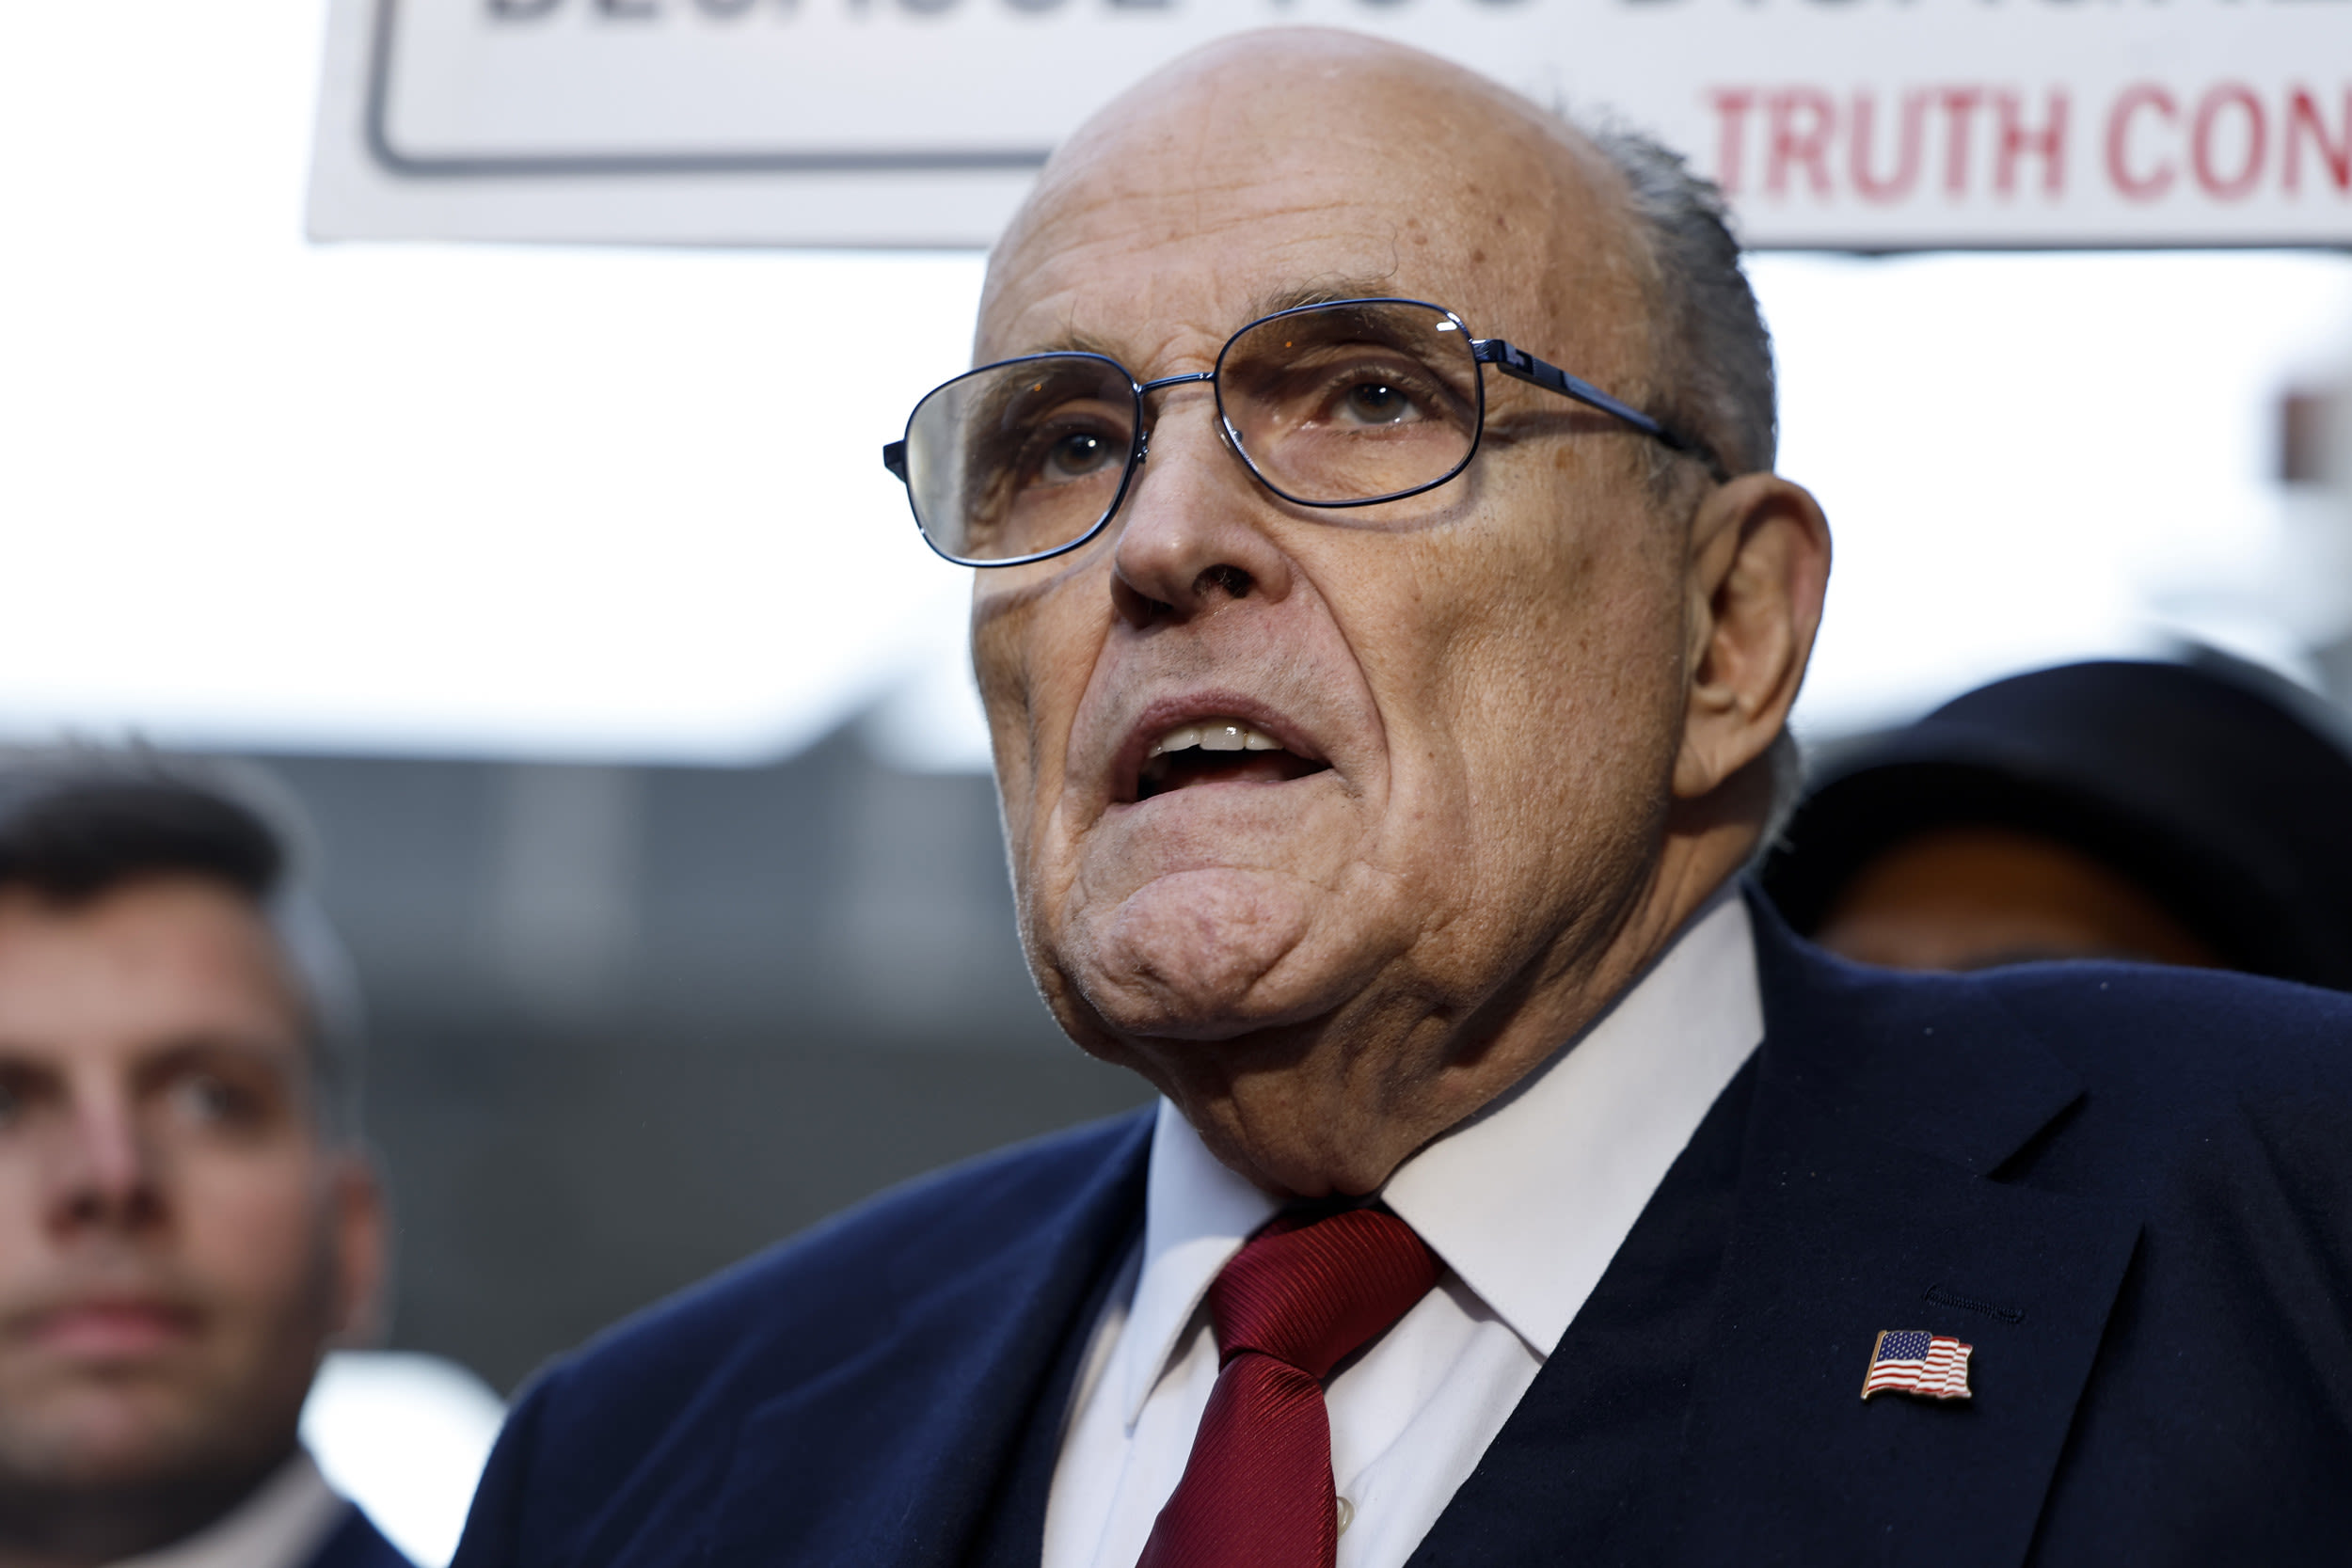 Rudy Giuliani gets good news about apartment sale